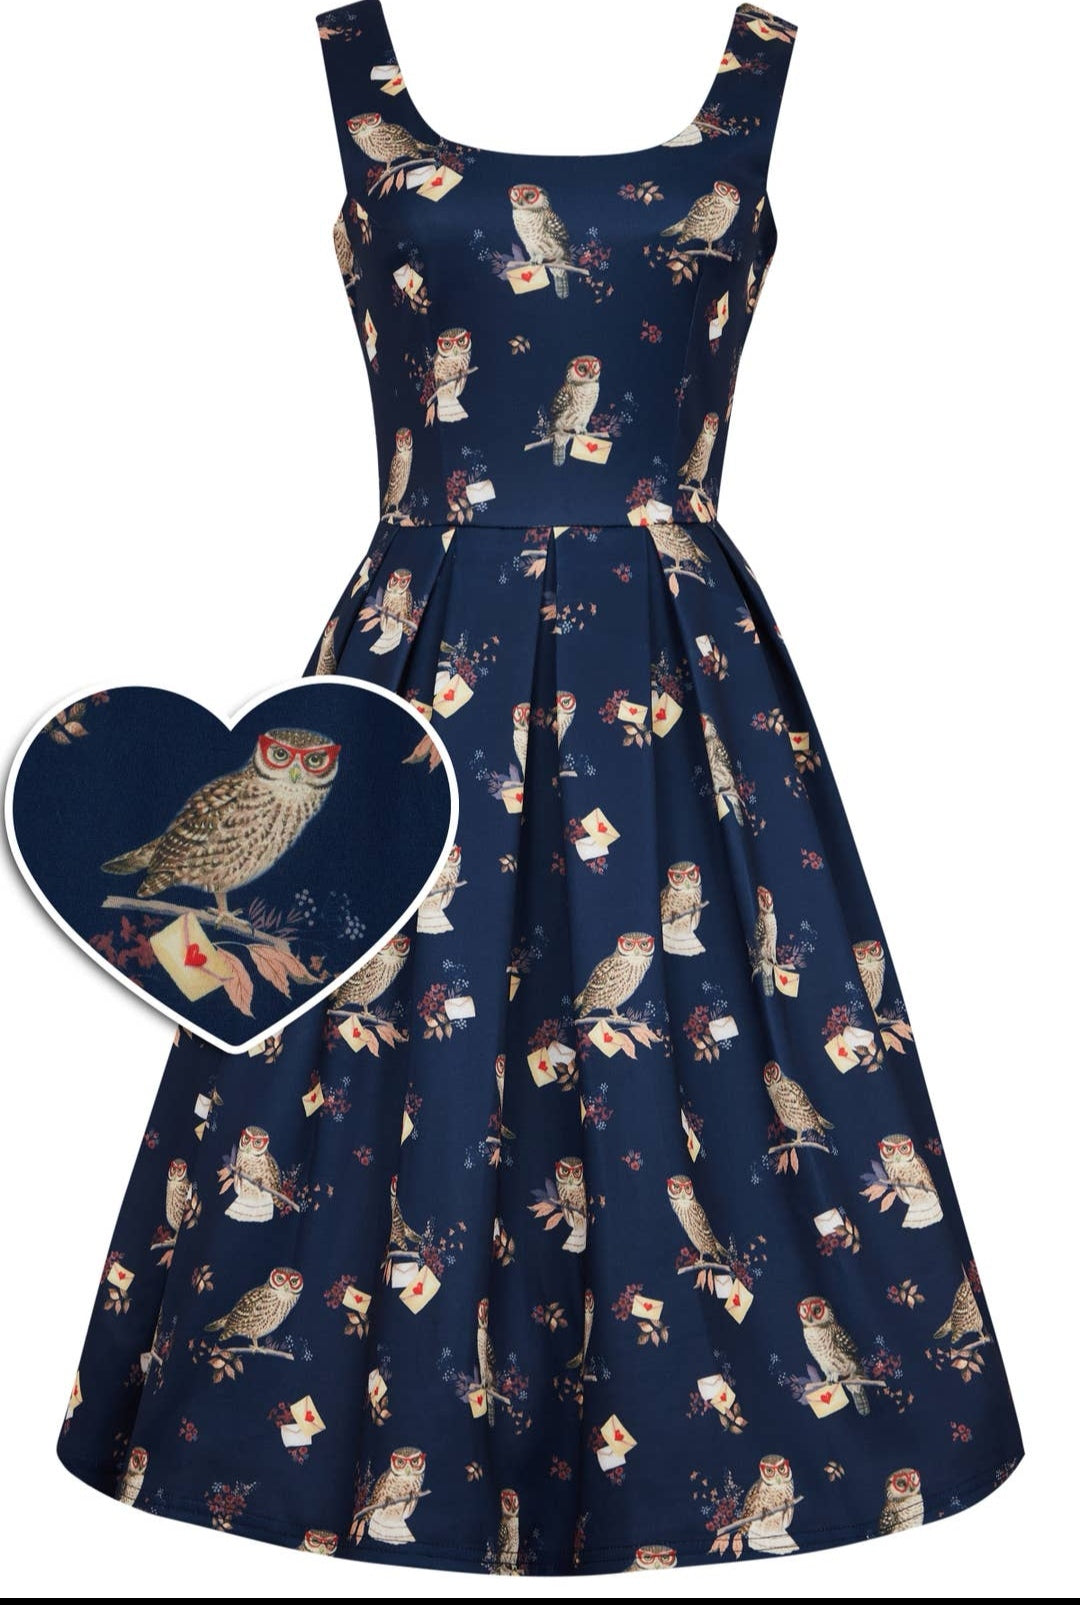 dolly and dotty amanda owl dress new for 2023 uk post included £64.95 size 8,12,26